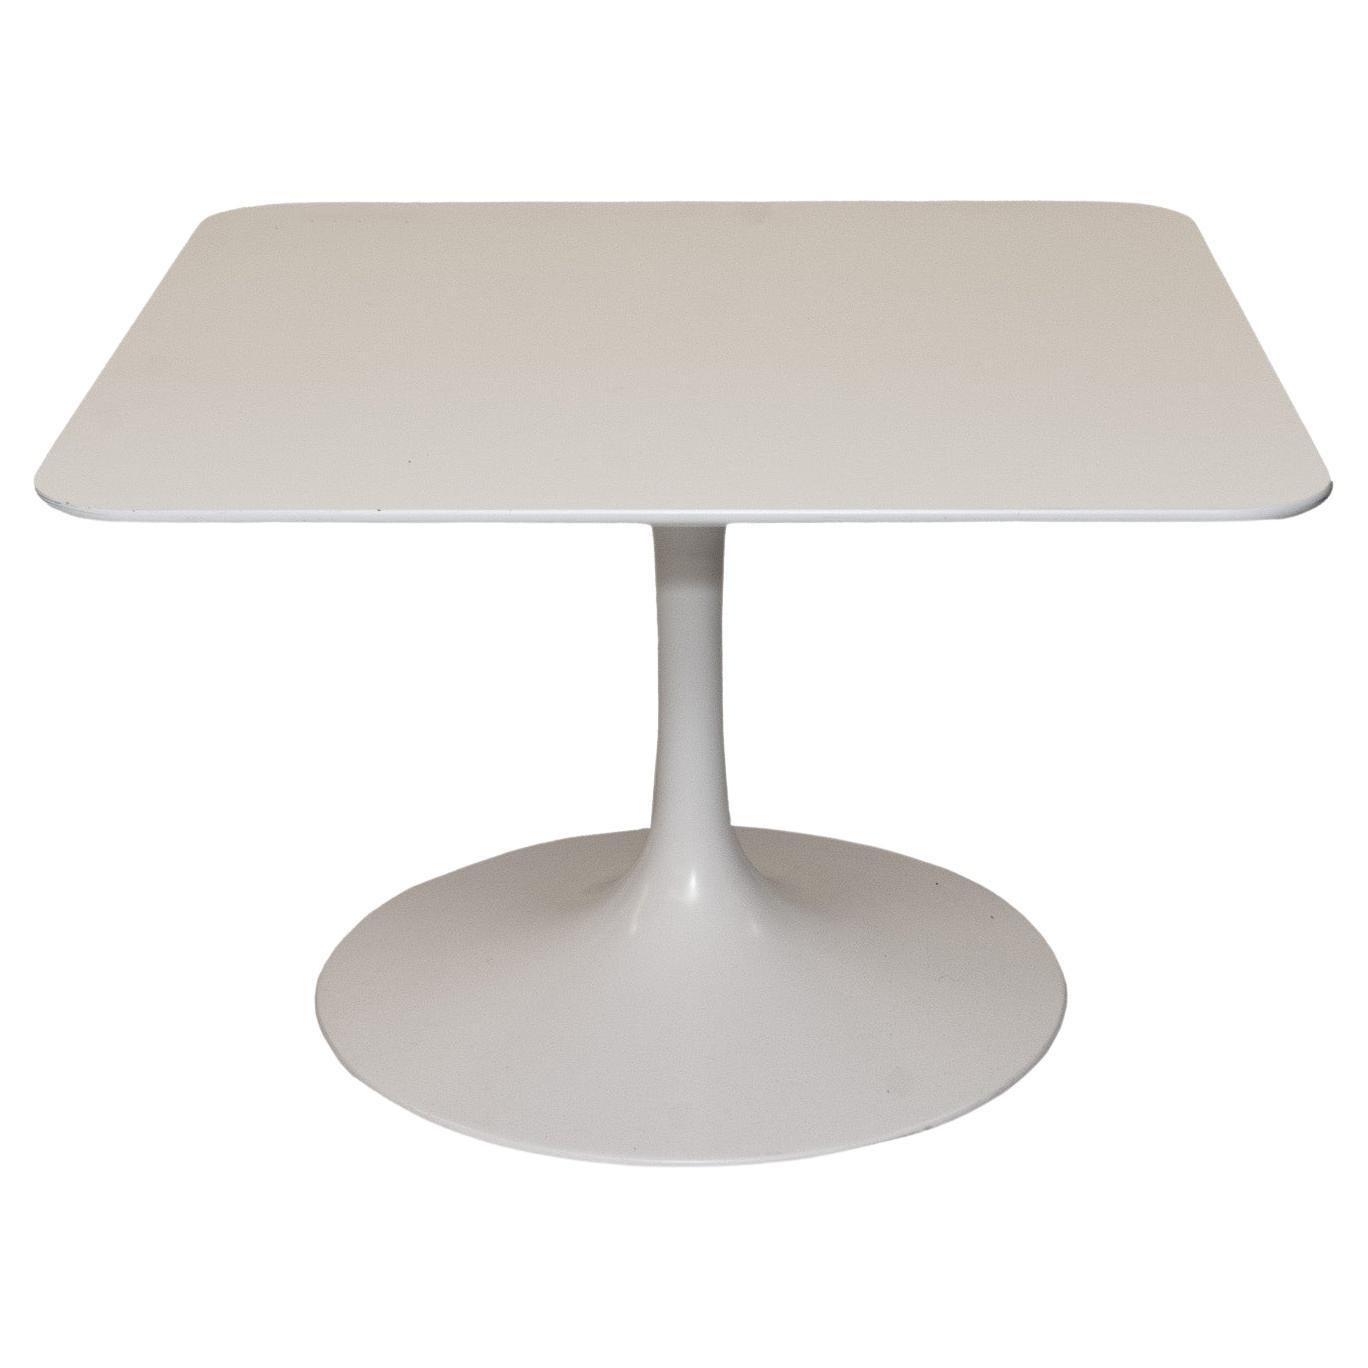 Modern Eames Style Square Tulip Table